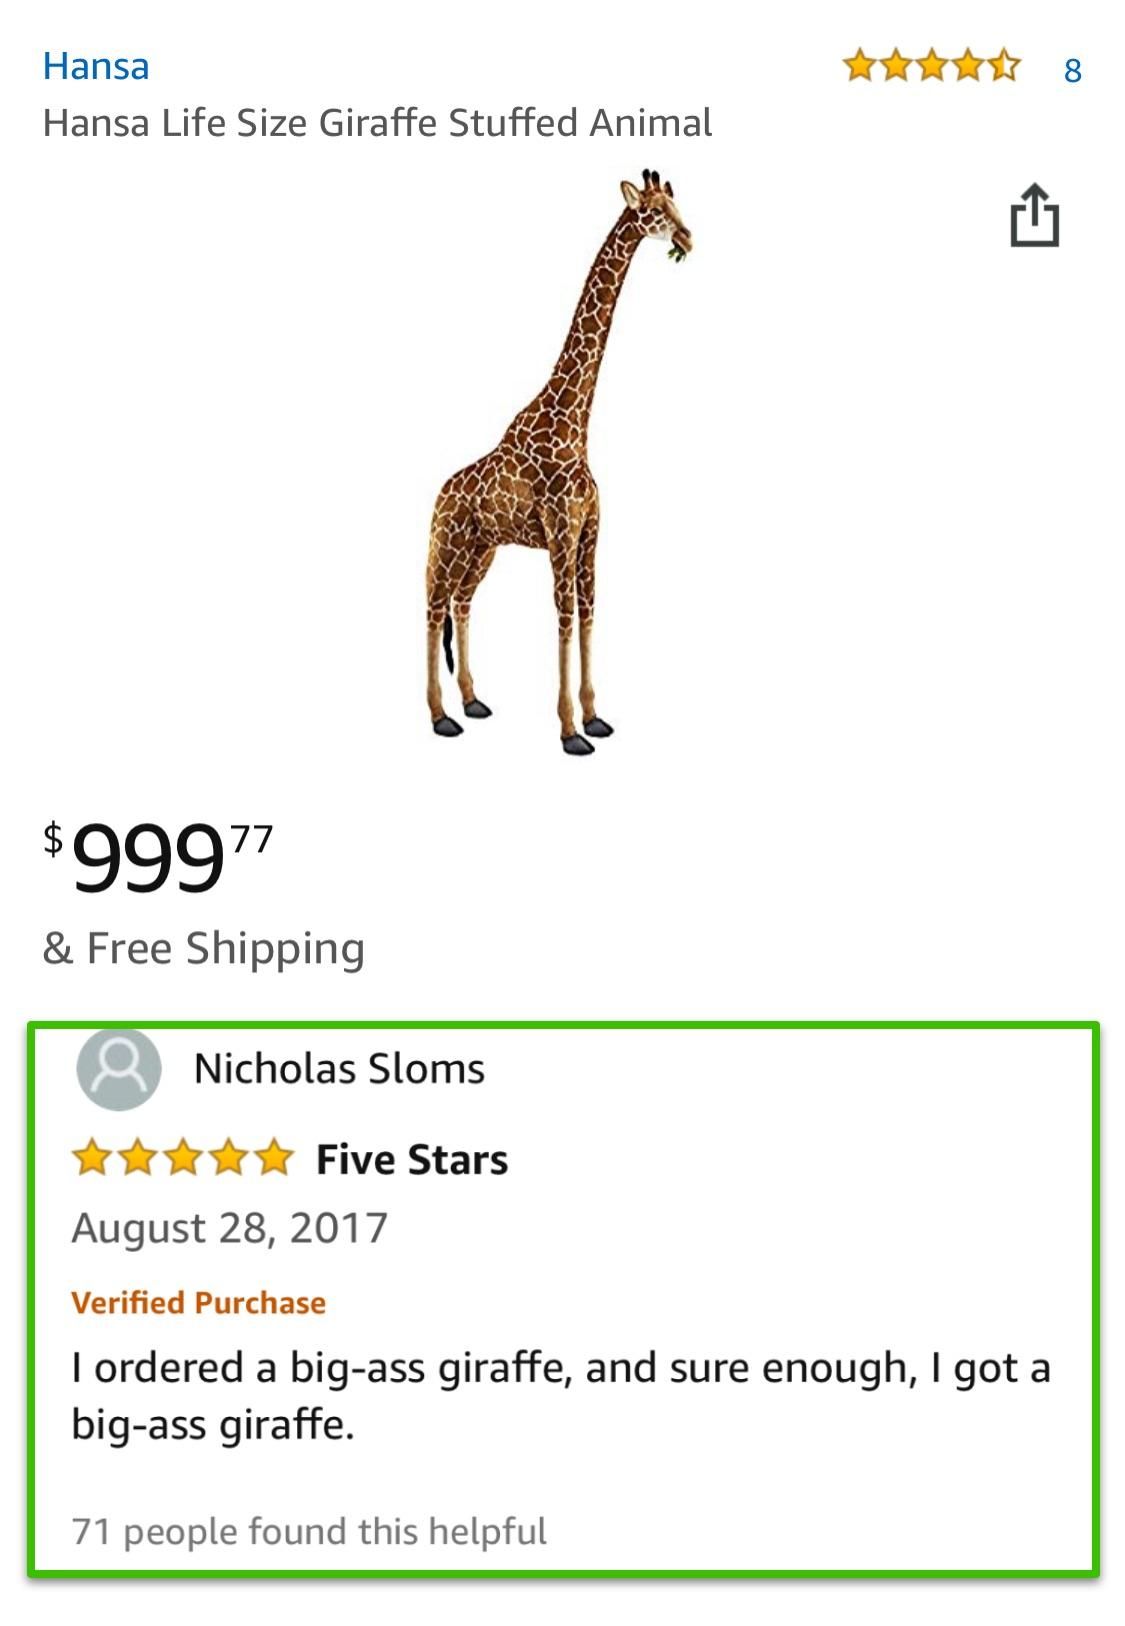 This review for a life-sized stuffed giraffe.